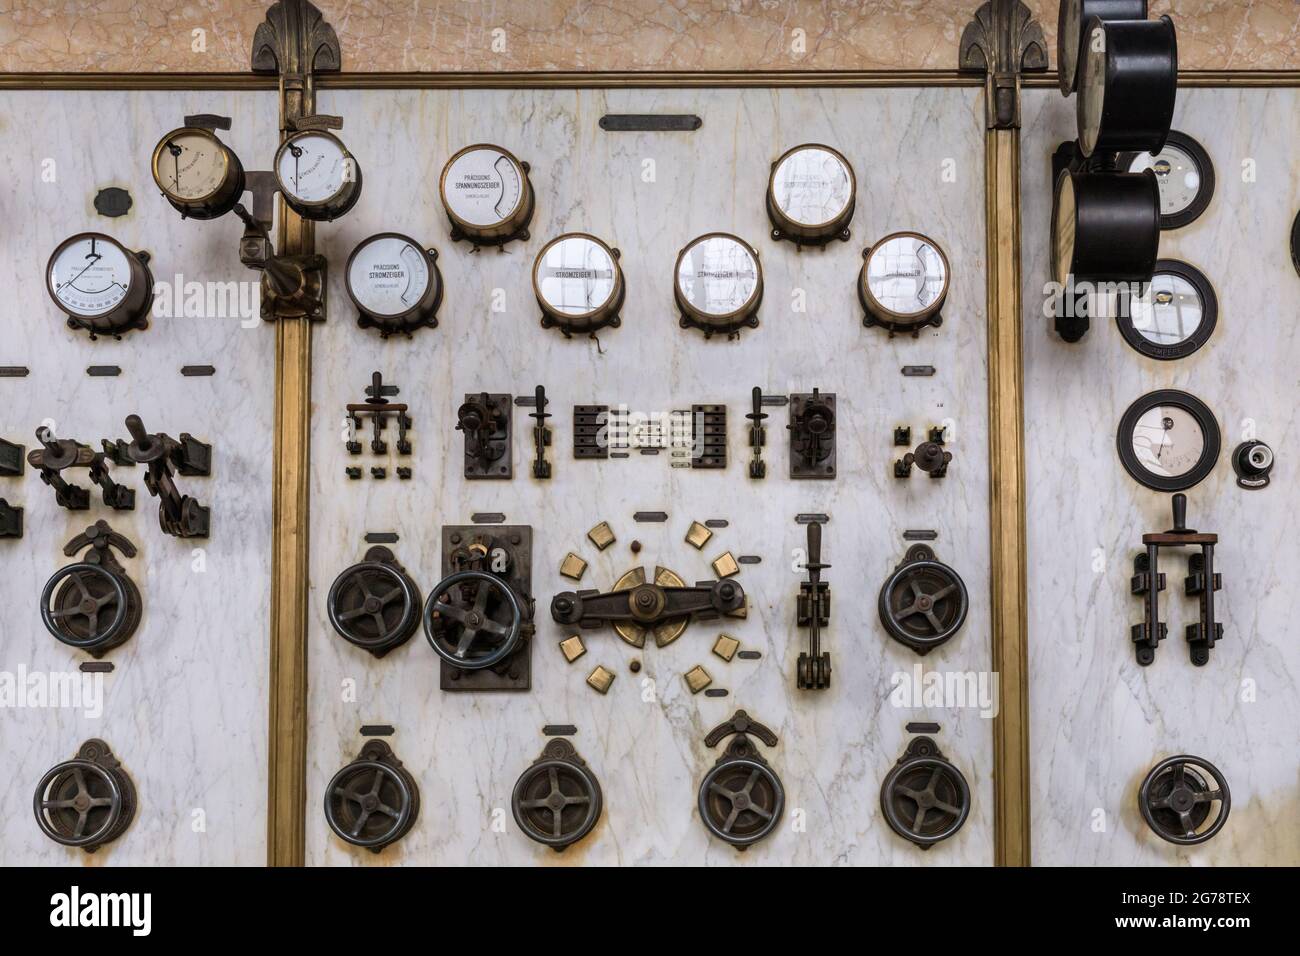 Controls and measures panel, Zeche Zollern former colliery machine hall, Dortmund, Germany Stock Photo